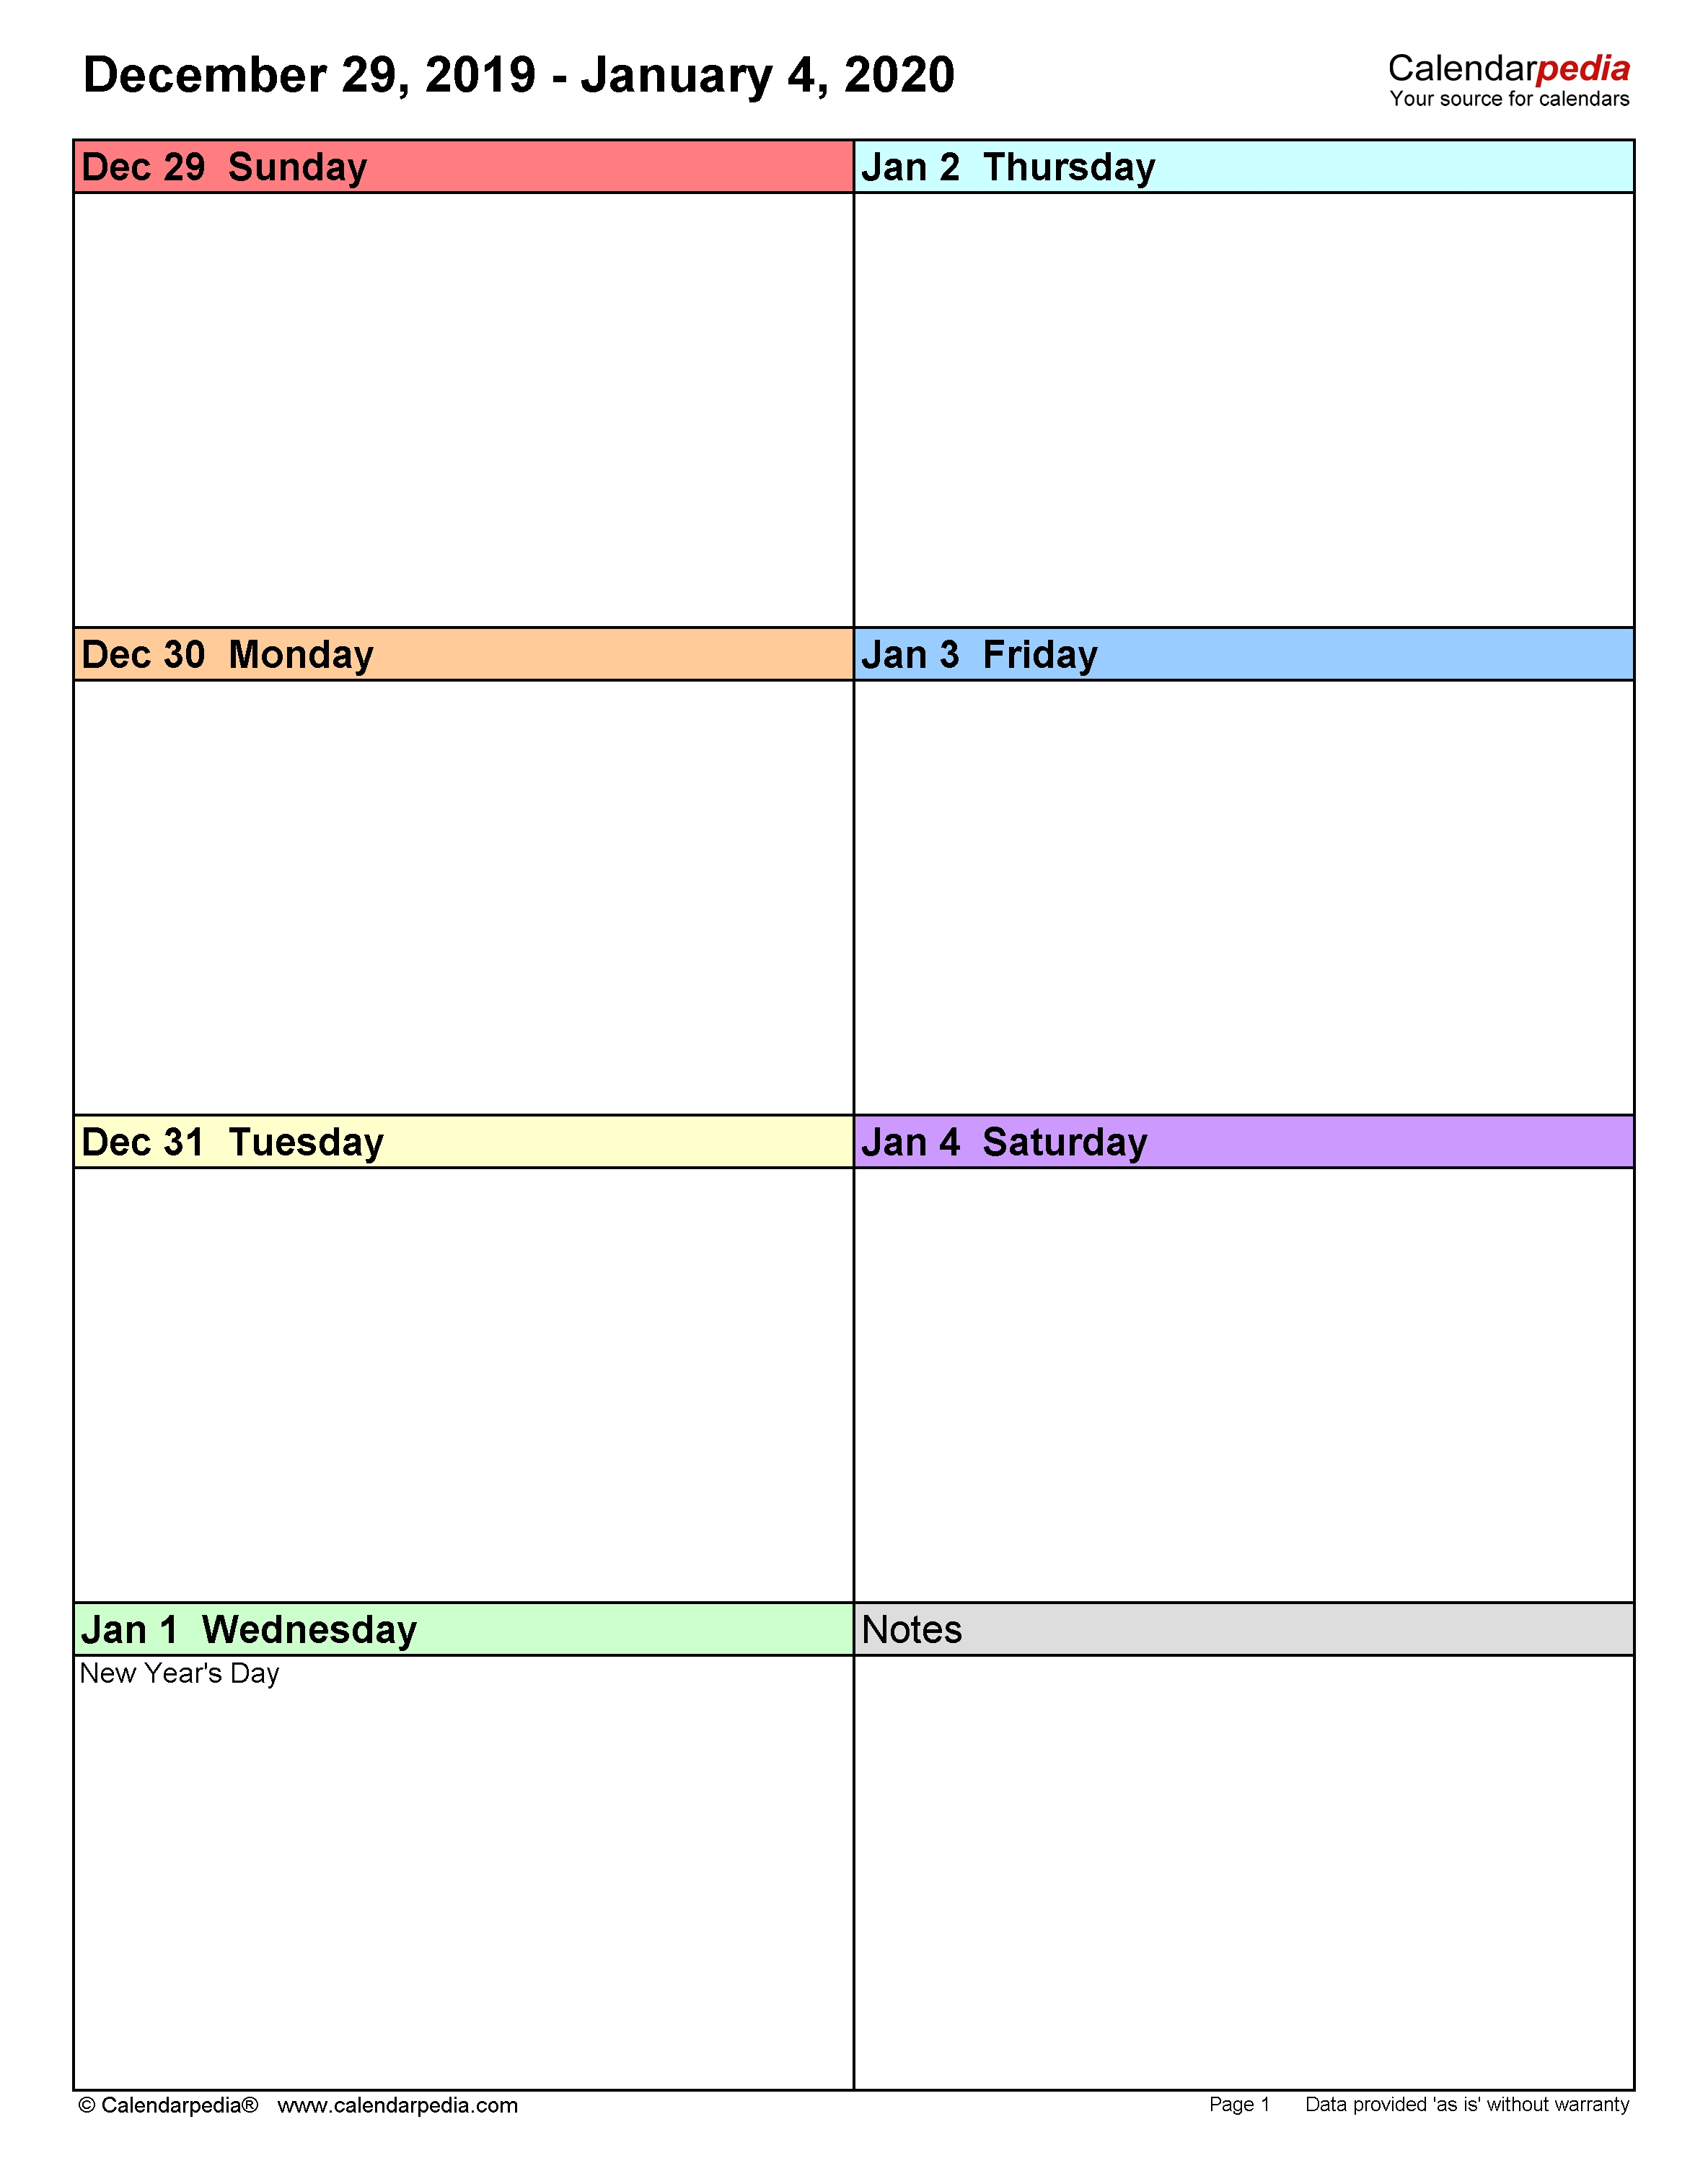 Weekly Calendars 2020 For Word - 12 Free Printable Templates Photo A Day Calendar Template